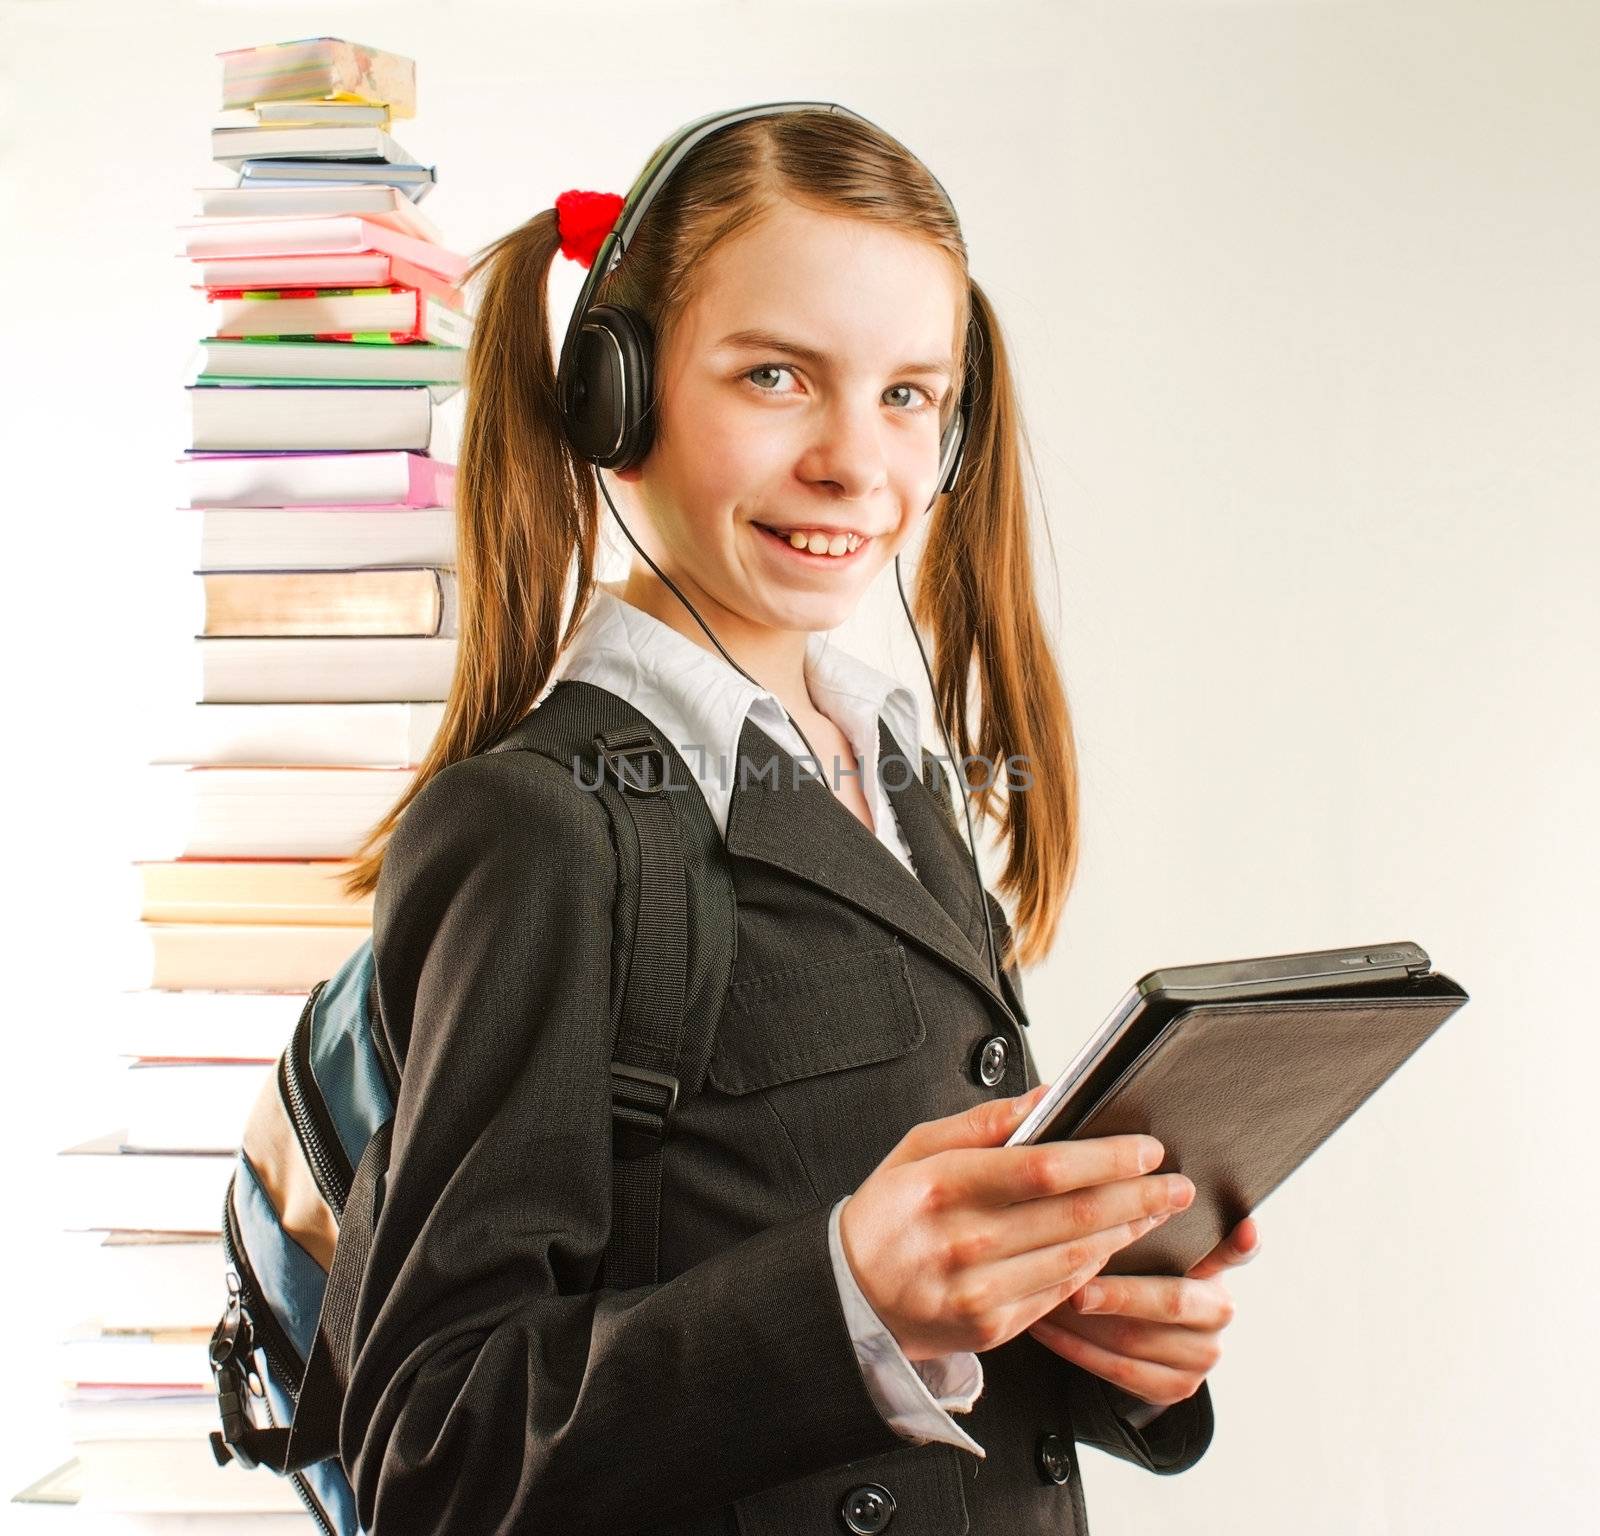 Teen girl with electronic book with a stack of printed books behind by AndreyKr